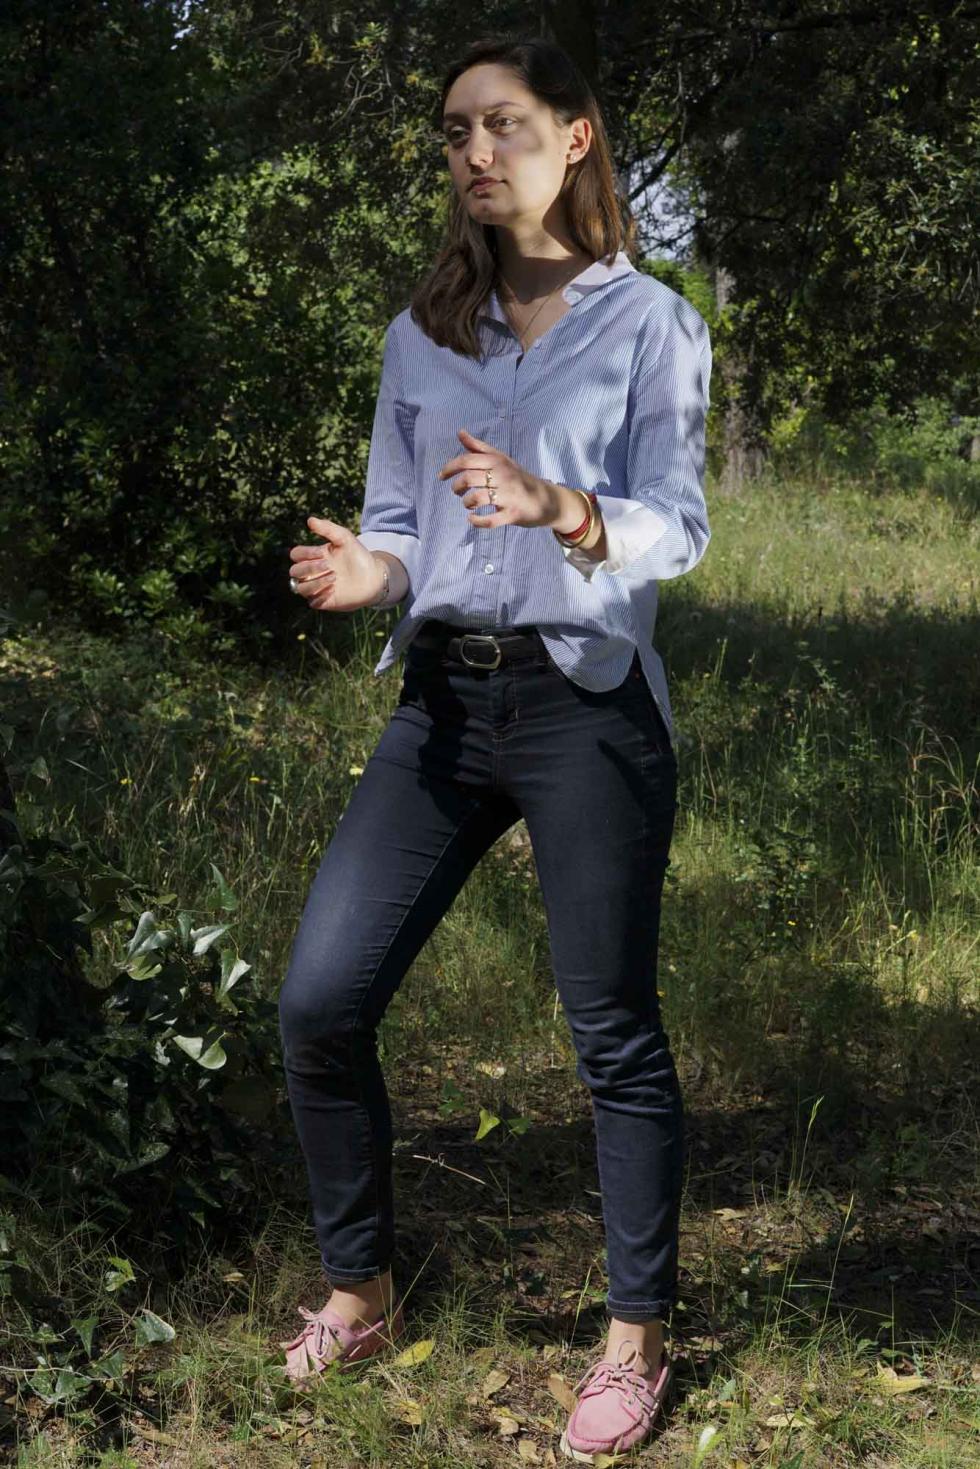 Woman wearing a light blue blouse with dark jeans outside in nature with their hands outstretched.